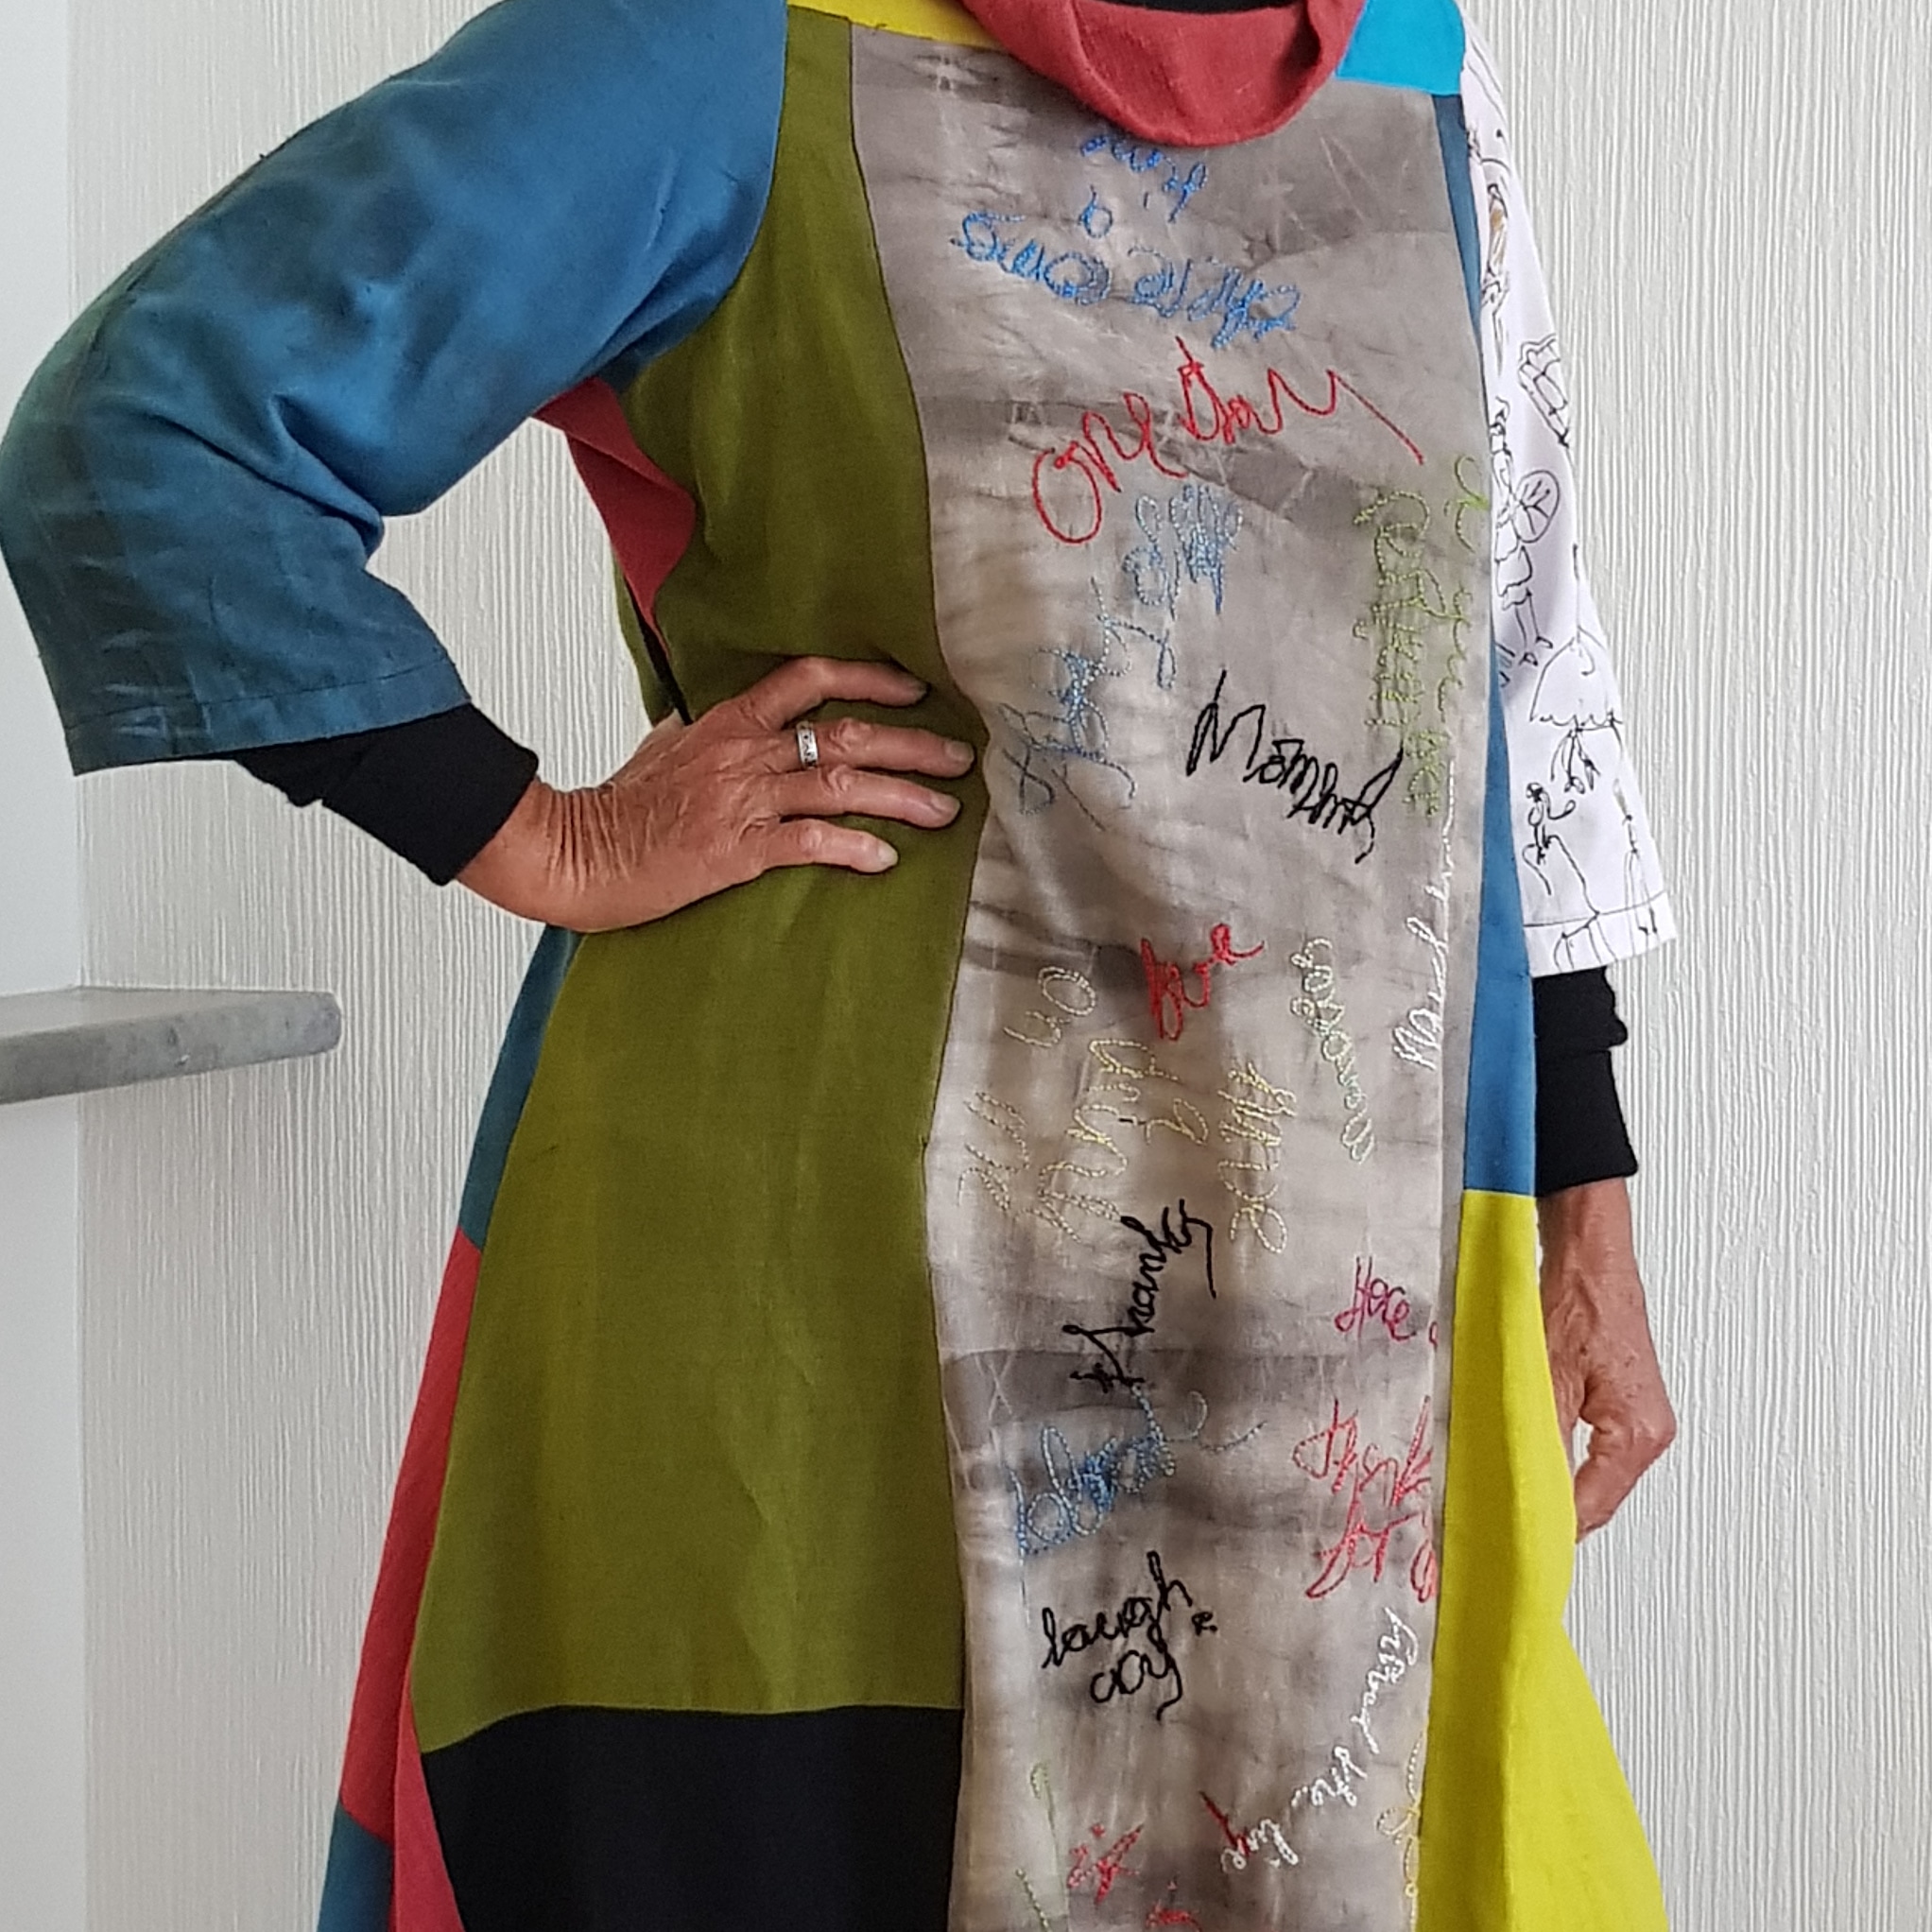 Transforming fashion by Aukje Boonstra in her Artist Profile